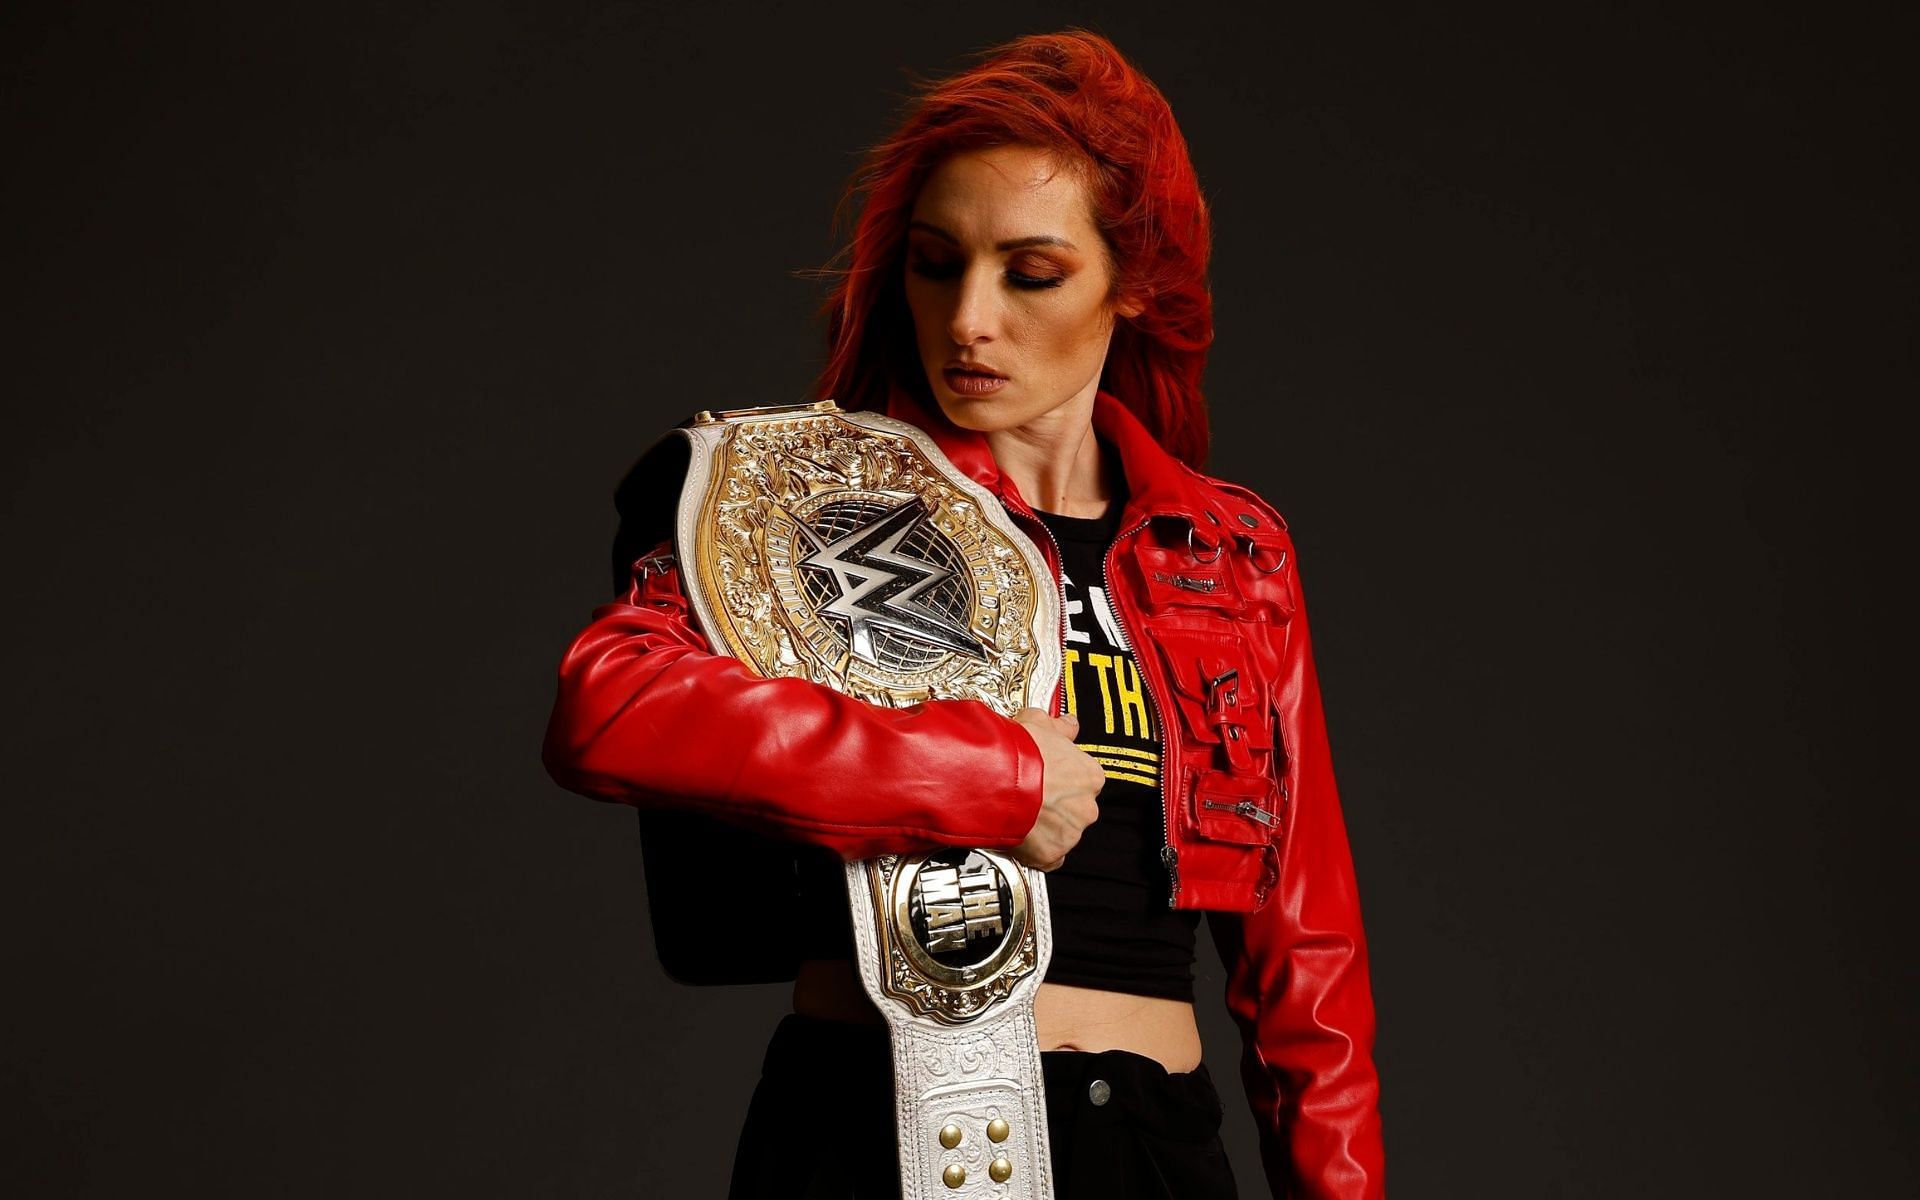 Becky Lynch will be fighting on next week